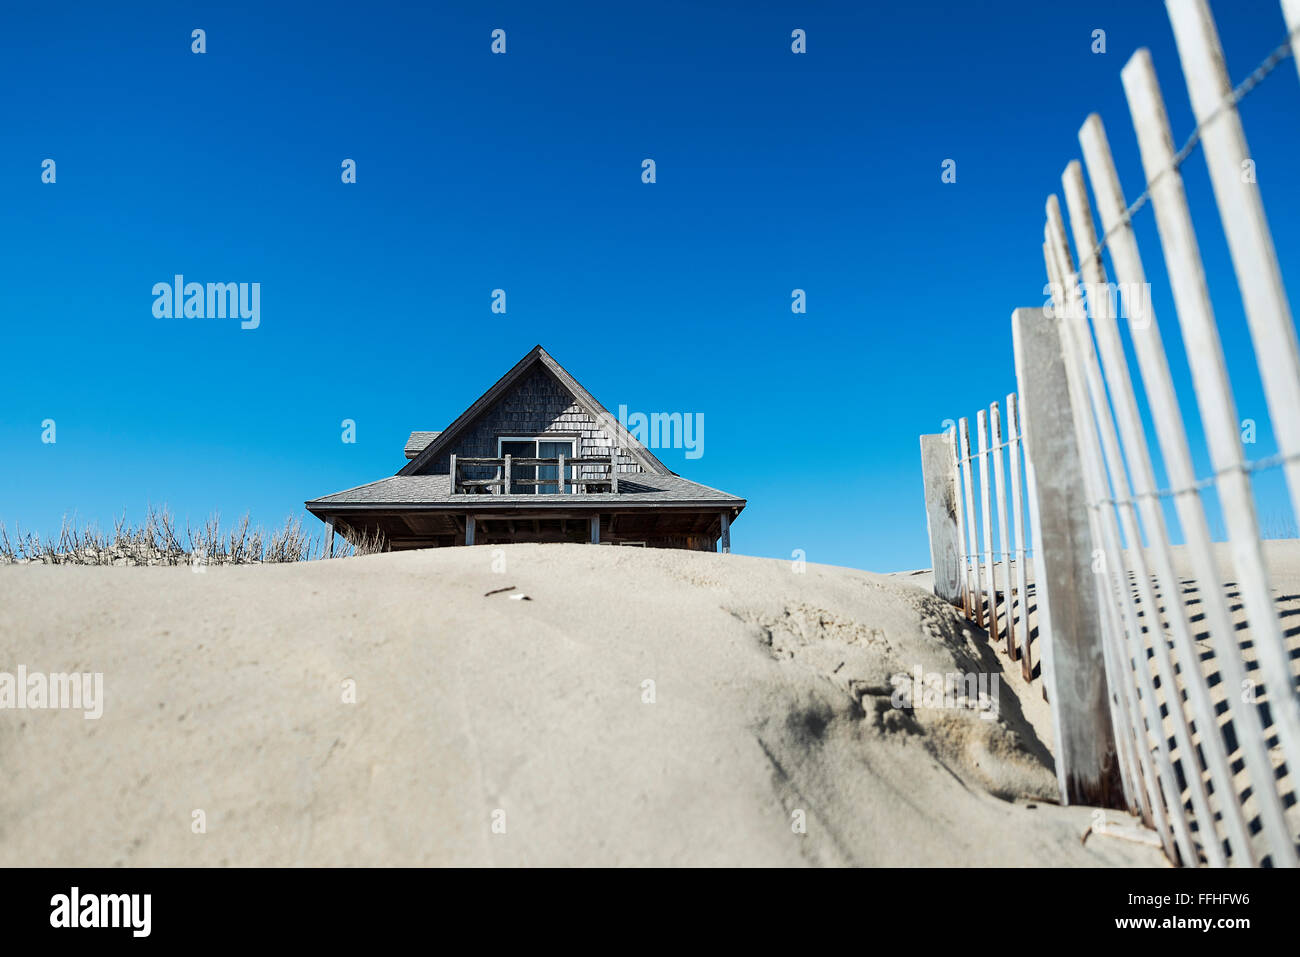 Secluded beach house bungalow Stock Photo